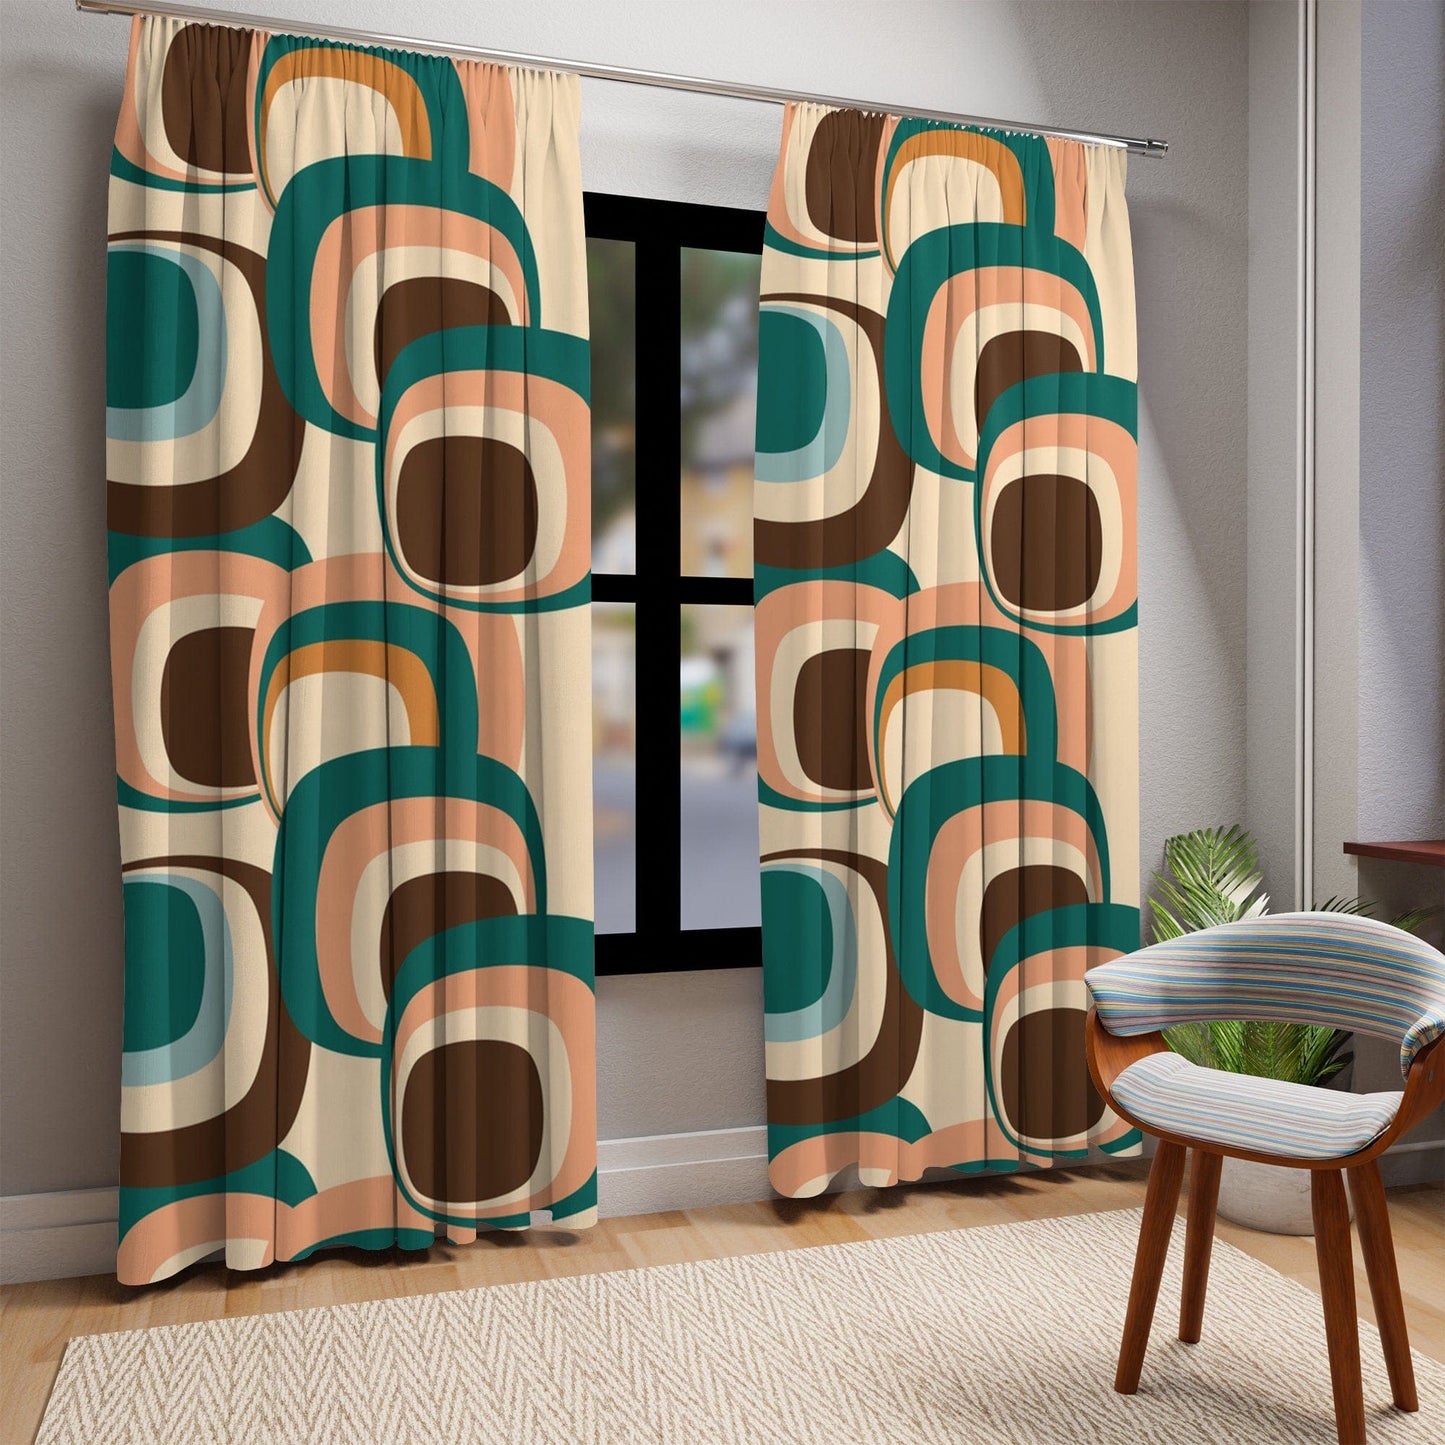 Kate McEnroe New York 60s, 70s Mid Century Modern Retro Geometric Window Curtains, Green, Blue, Brown, Beige MCM Curtain Panels, Living Room, Bedroom Drapes Gifts Window Curtains